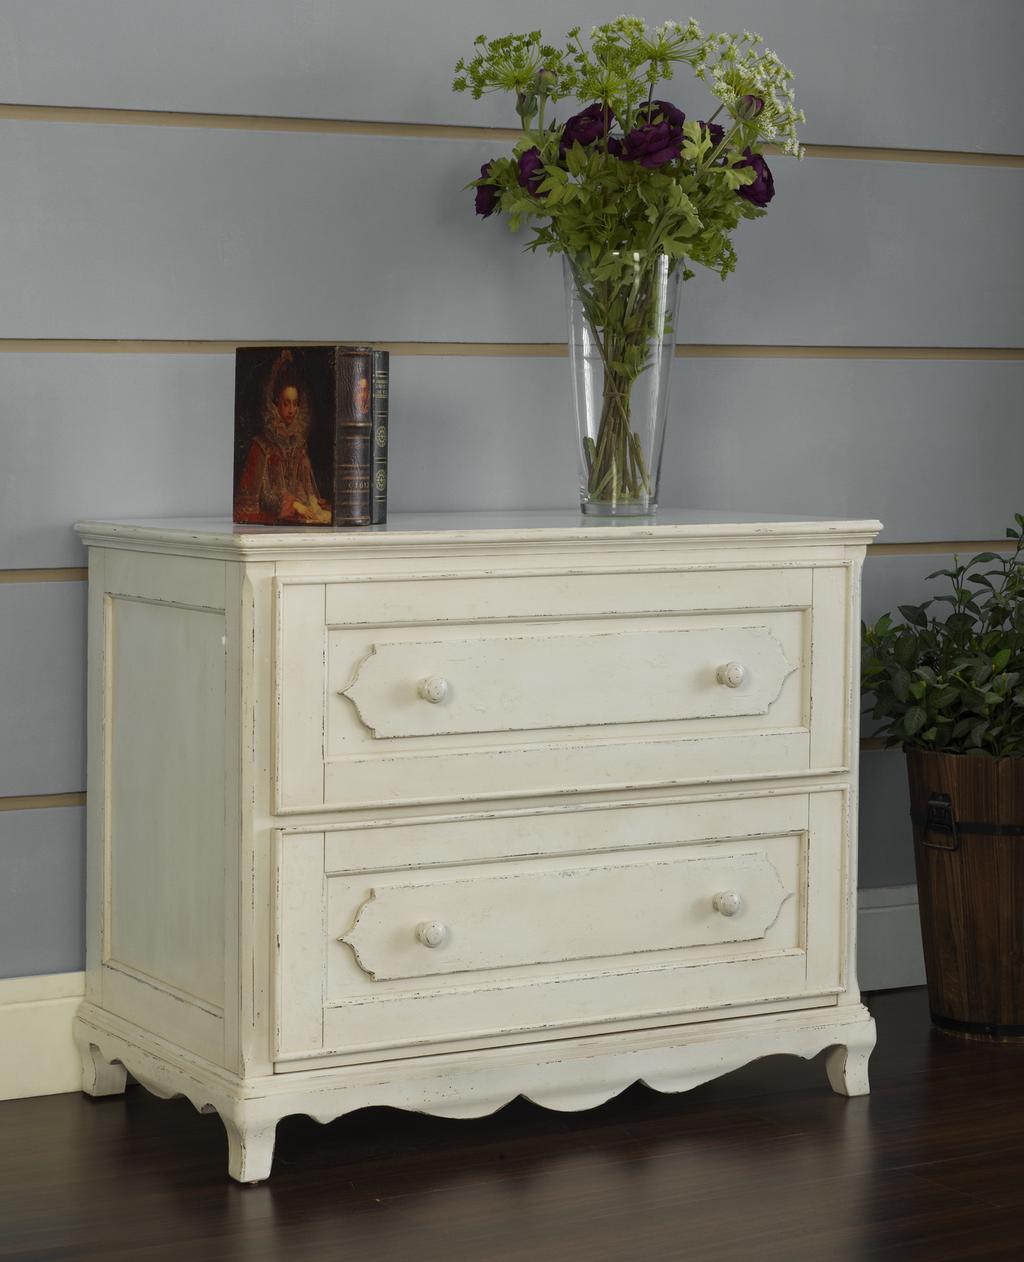 File drawers hold both letter and legal file sizes. Durable English dovetail drawer construction.